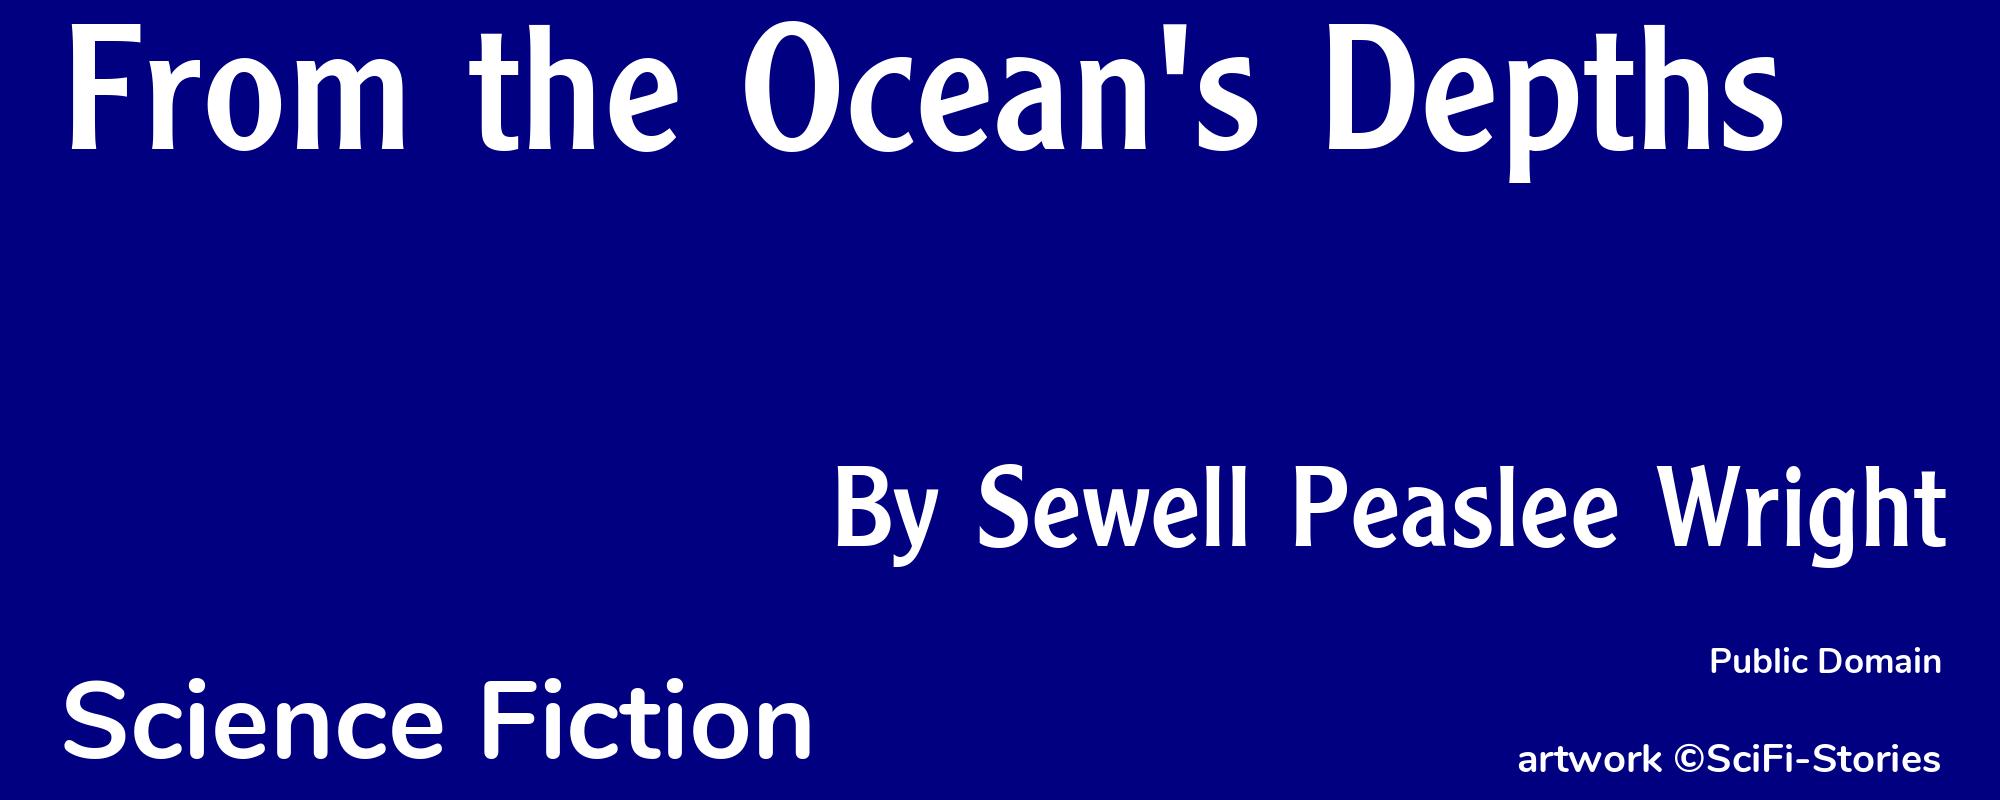 From the Ocean's Depths - Cover